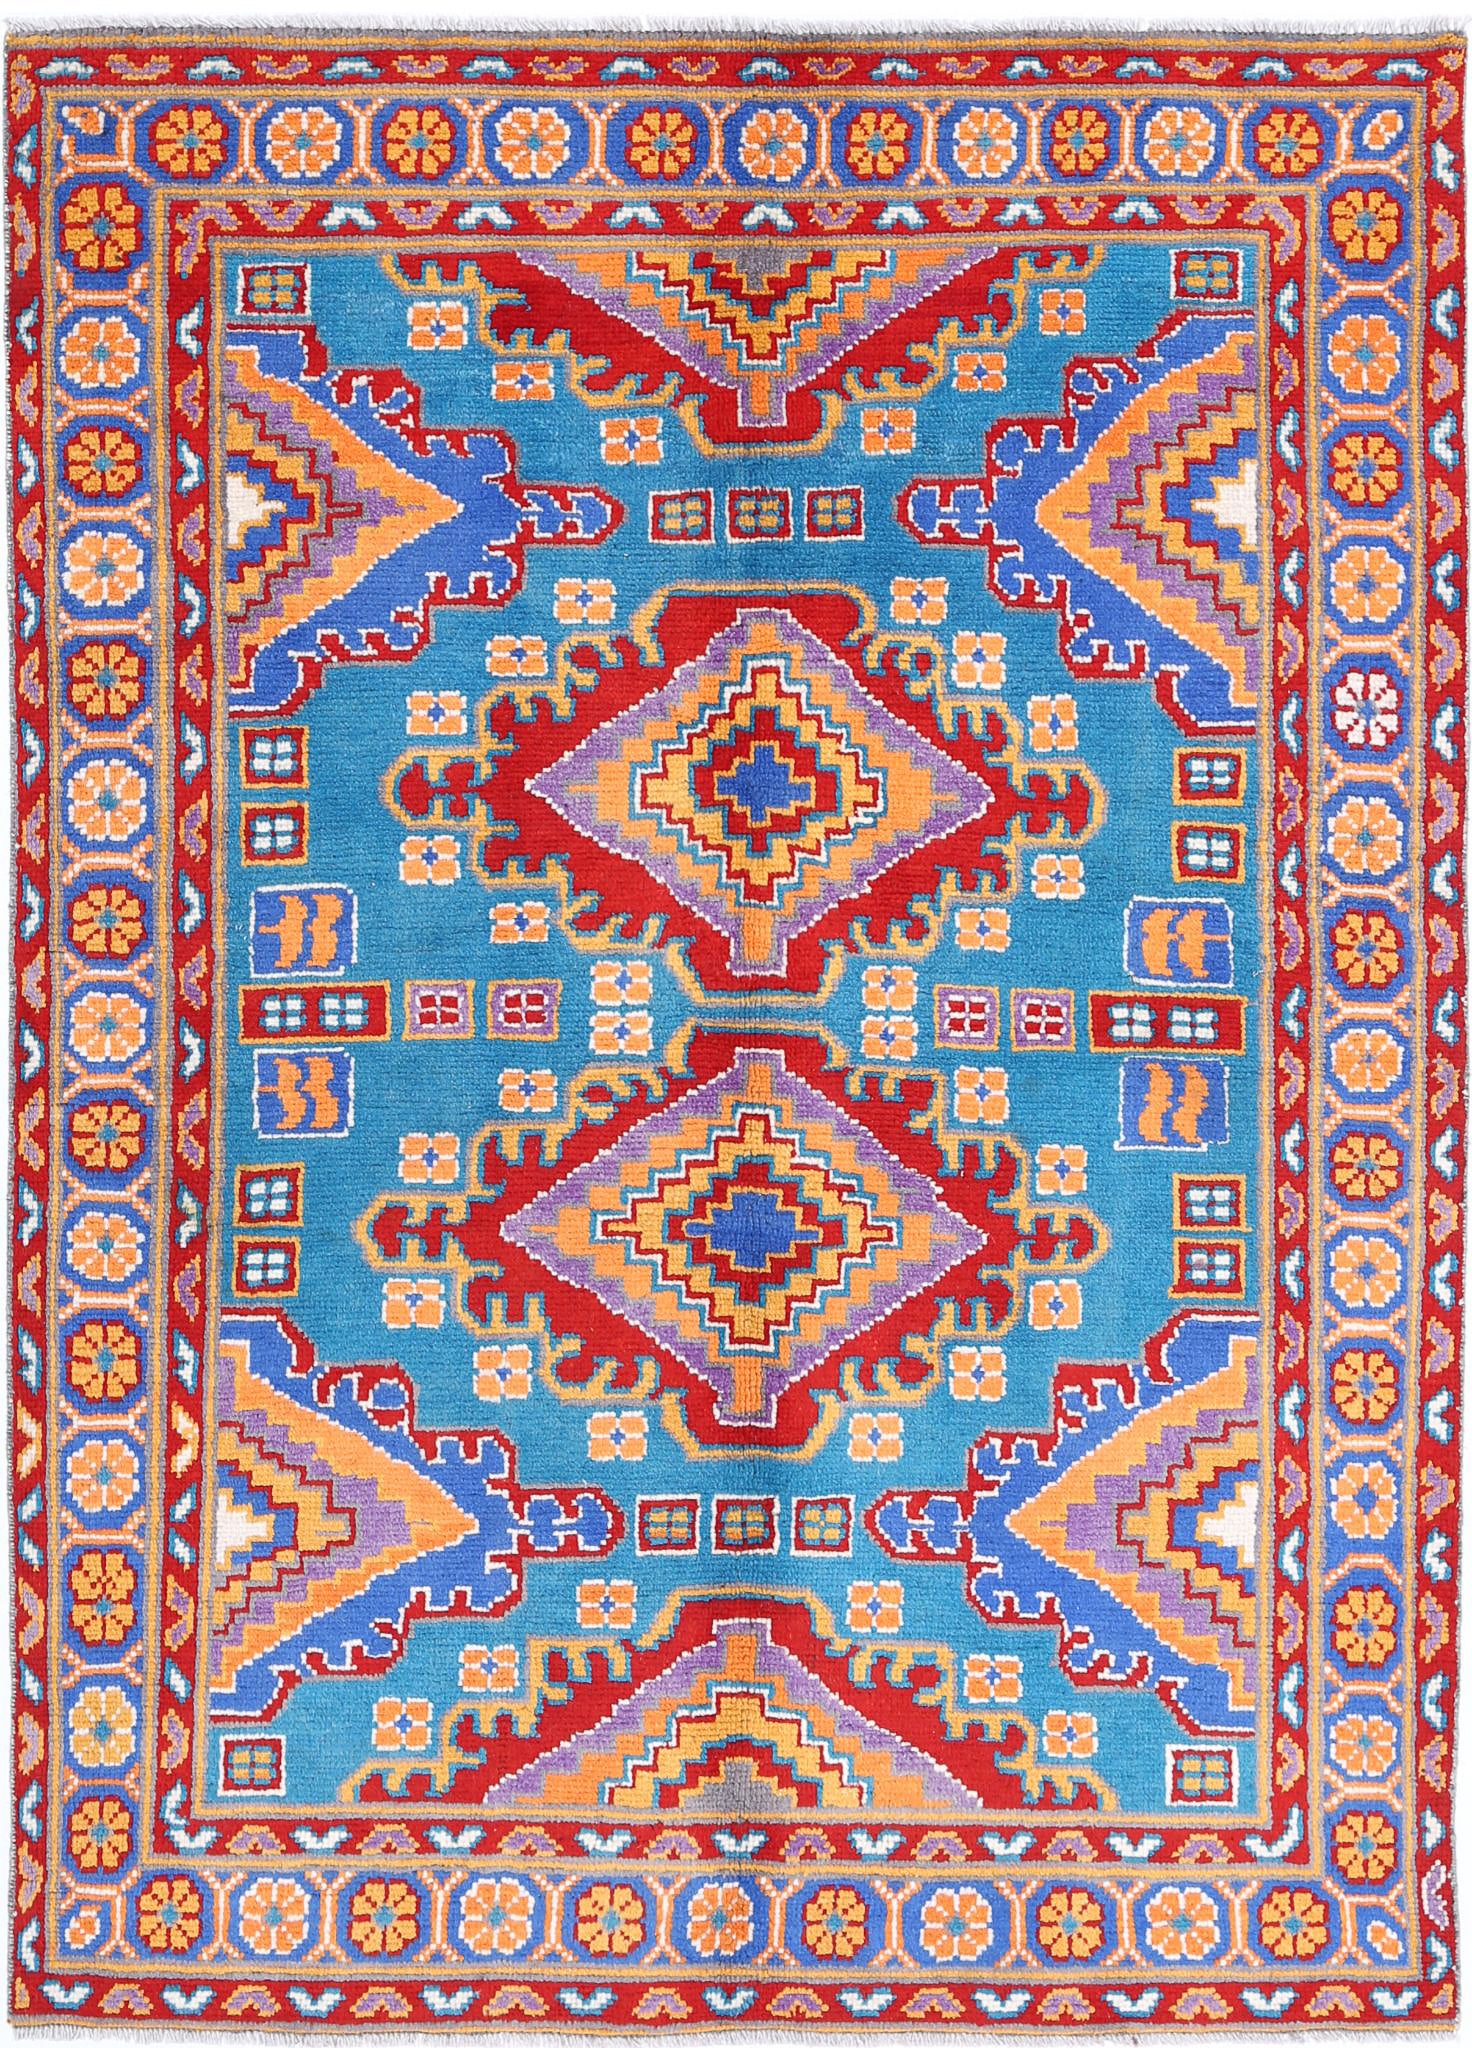 Revival-hand-knotted-qarghani-wool-rug-5014093.jpg